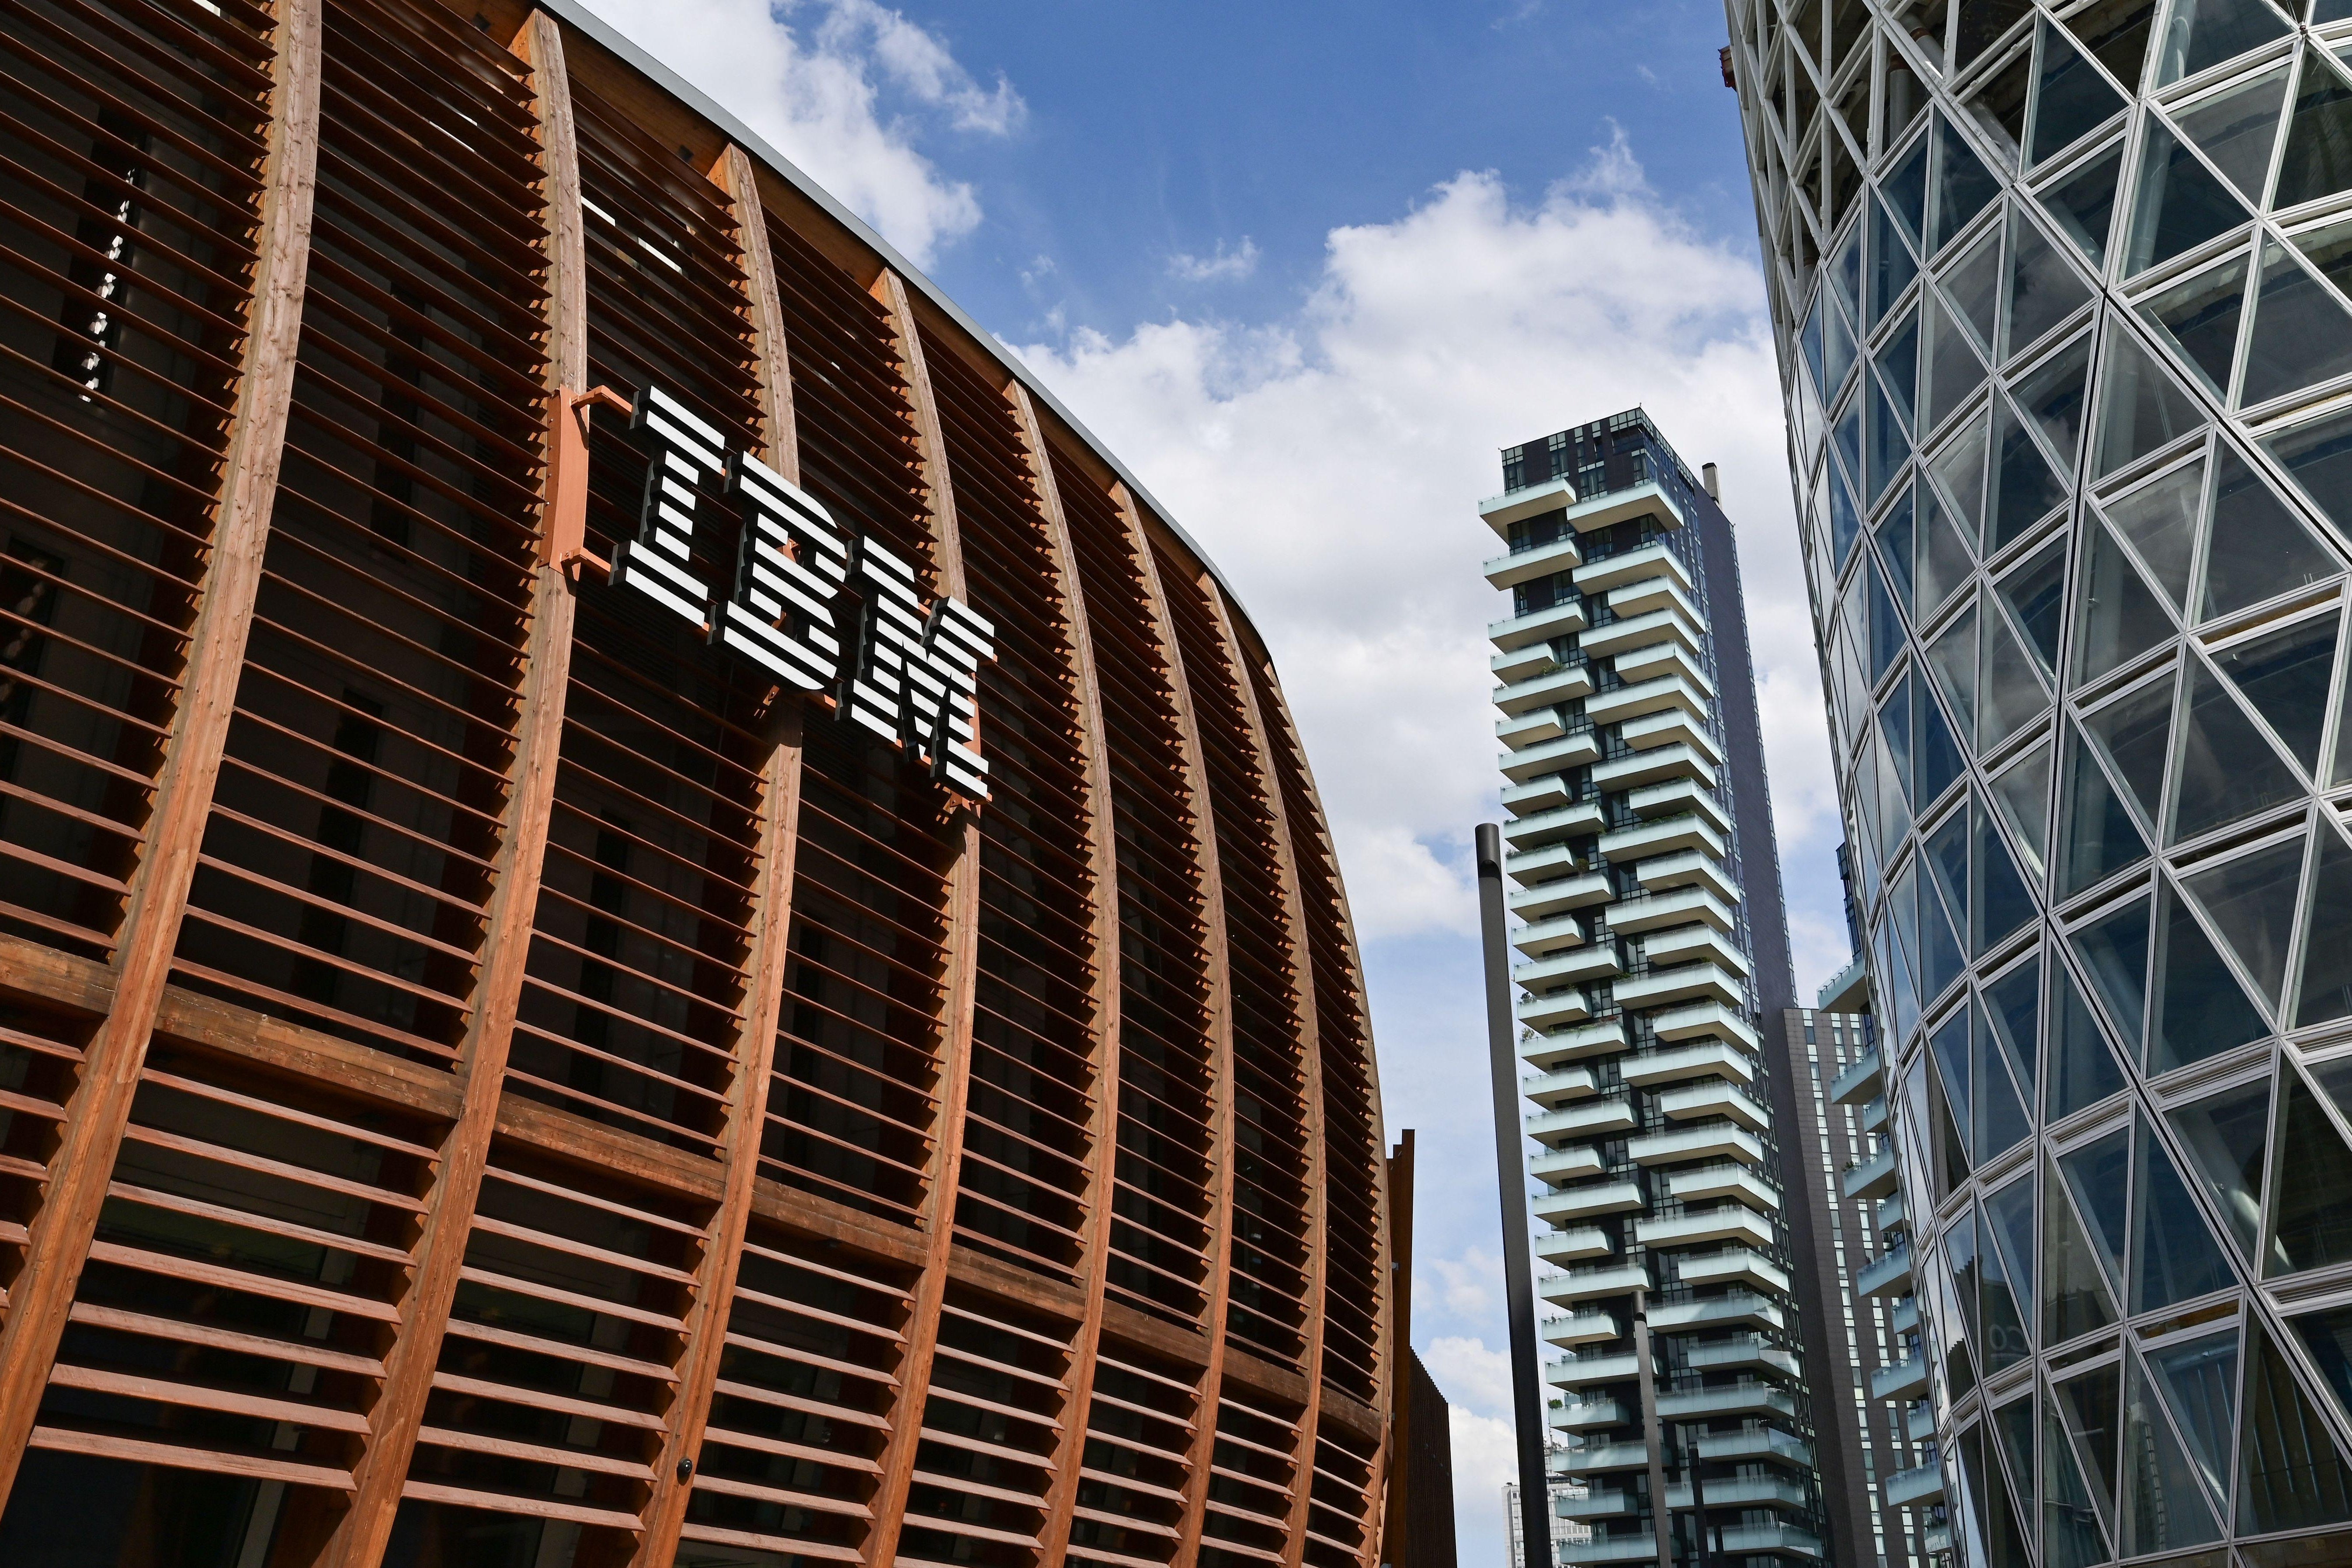 The exterior of an IBM building.